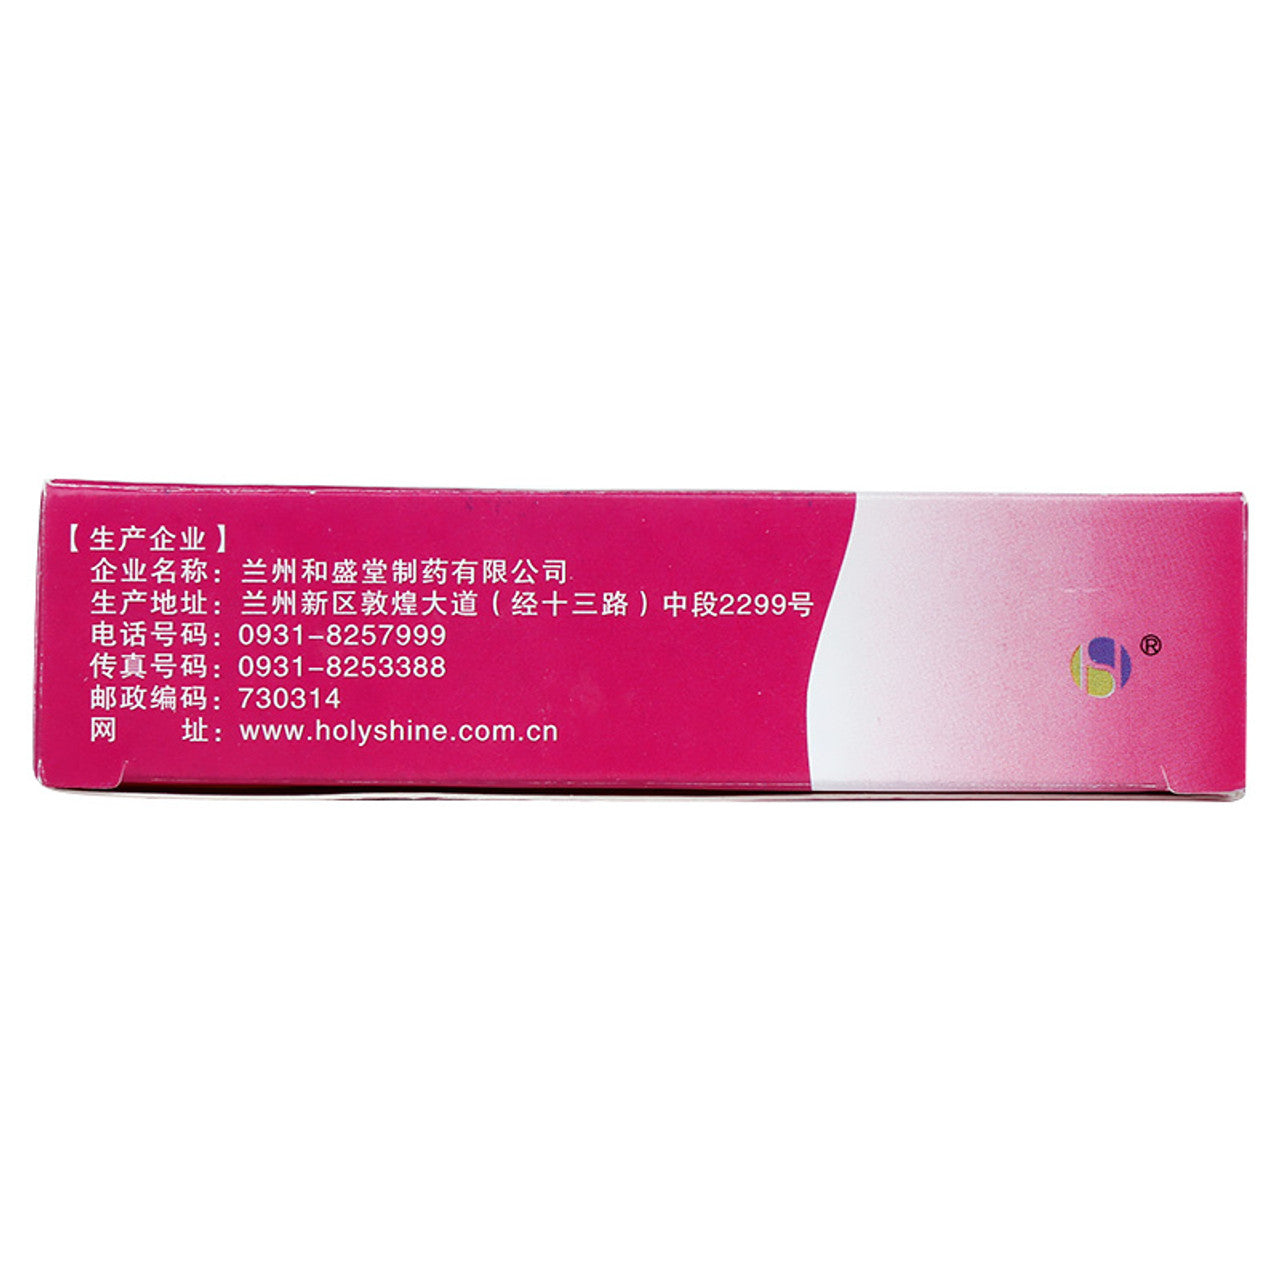 China Herb. Brand Heshengtang. Danggui Futongning Diwan or  Danggui Futongning Dripping Pills or Dang Gui Fu Tong Ning Di Wan for dysmenorrhea, postpartum contractions, and acute abdominal pain caused by infectious diarrhea.